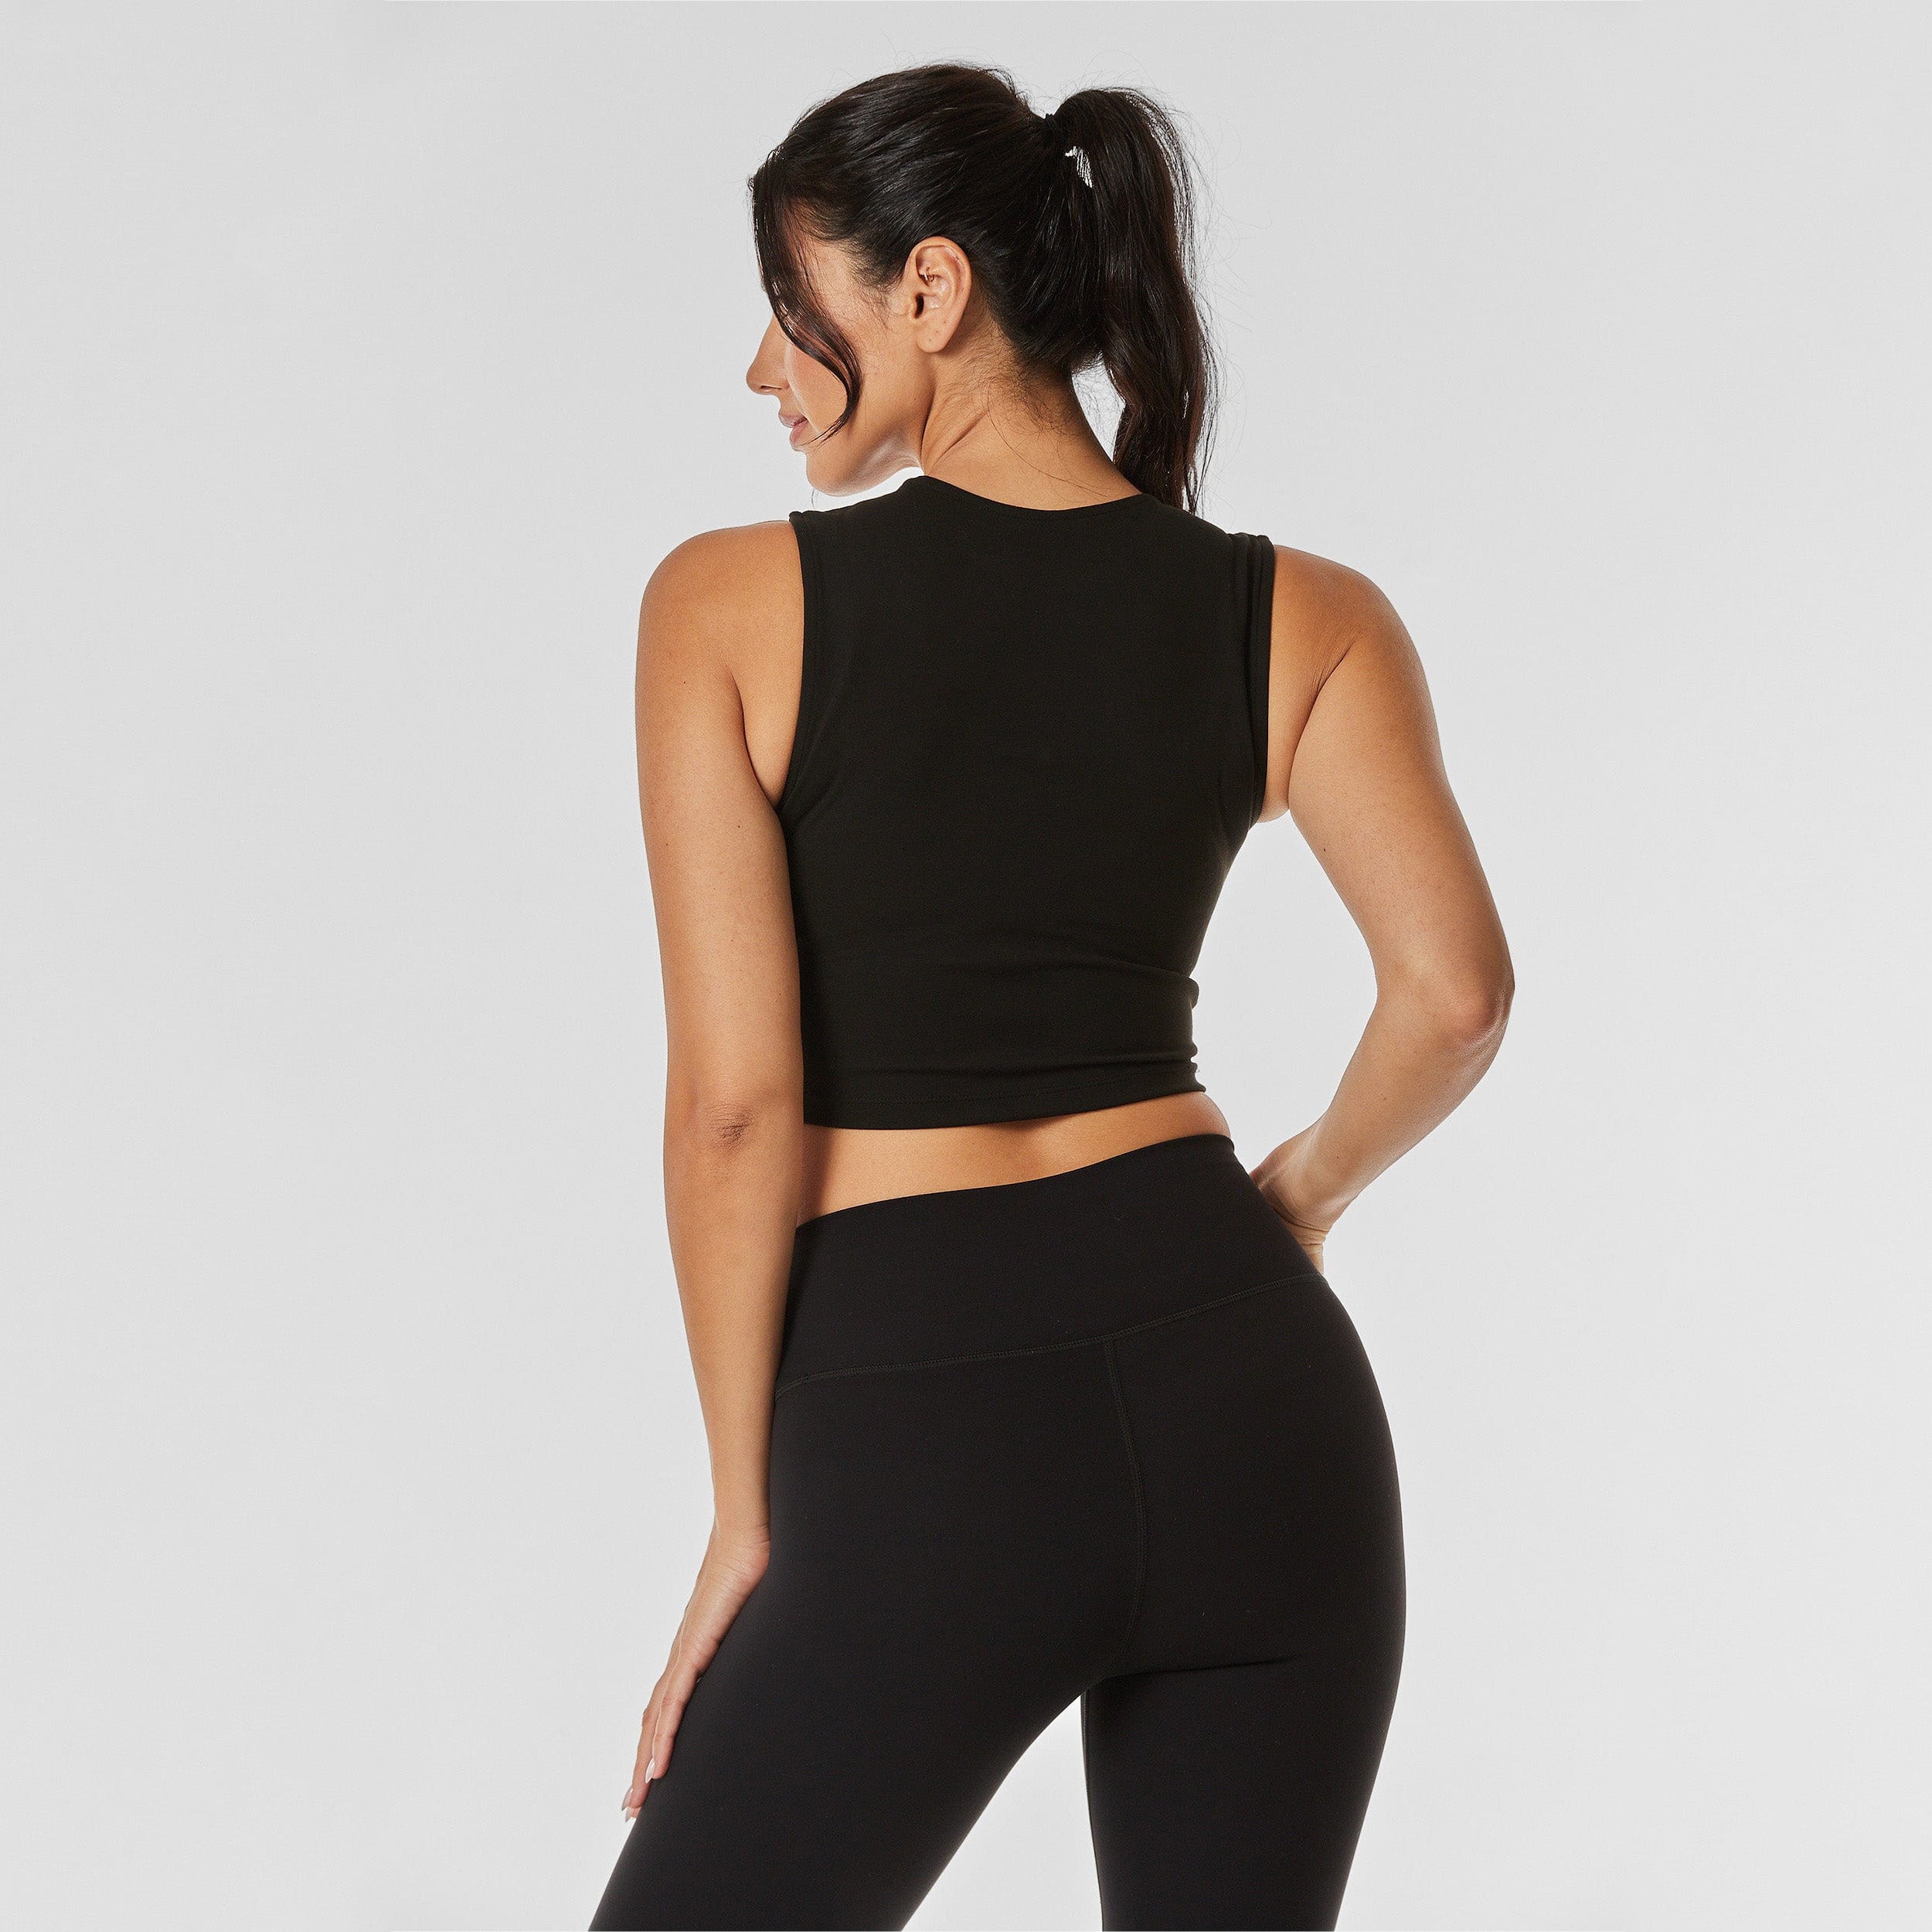 Rear view of woman wearing black and matching leggings